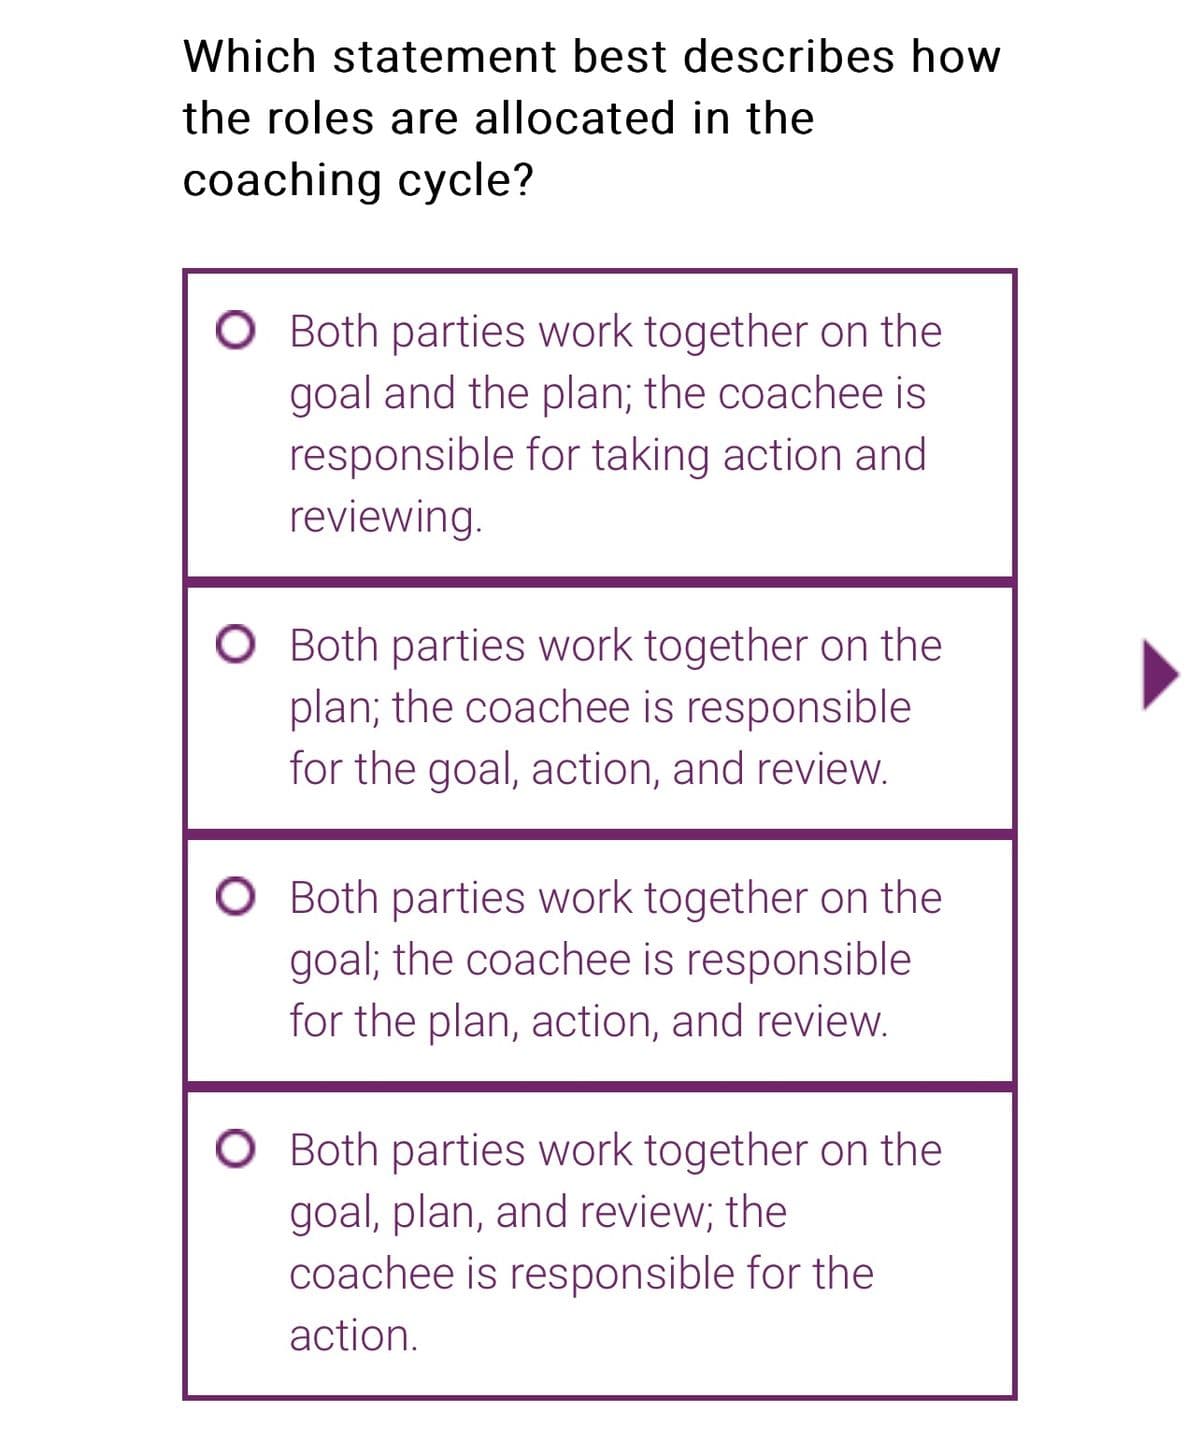 Which statement best describes how
the roles are allocated in the
coaching cycle?
O Both parties work together on the
goal and the plan; the coachee is
responsible for taking action and
reviewing.
O Both parties work together on the
plan; the coachee is responsible
for the goal, action, and review.
O Both parties work together on the
goal; the coachee is responsible
for the plan, action, and review.
O Both parties work together on the
goal, plan, and review; the
coachee is responsible for the
action.